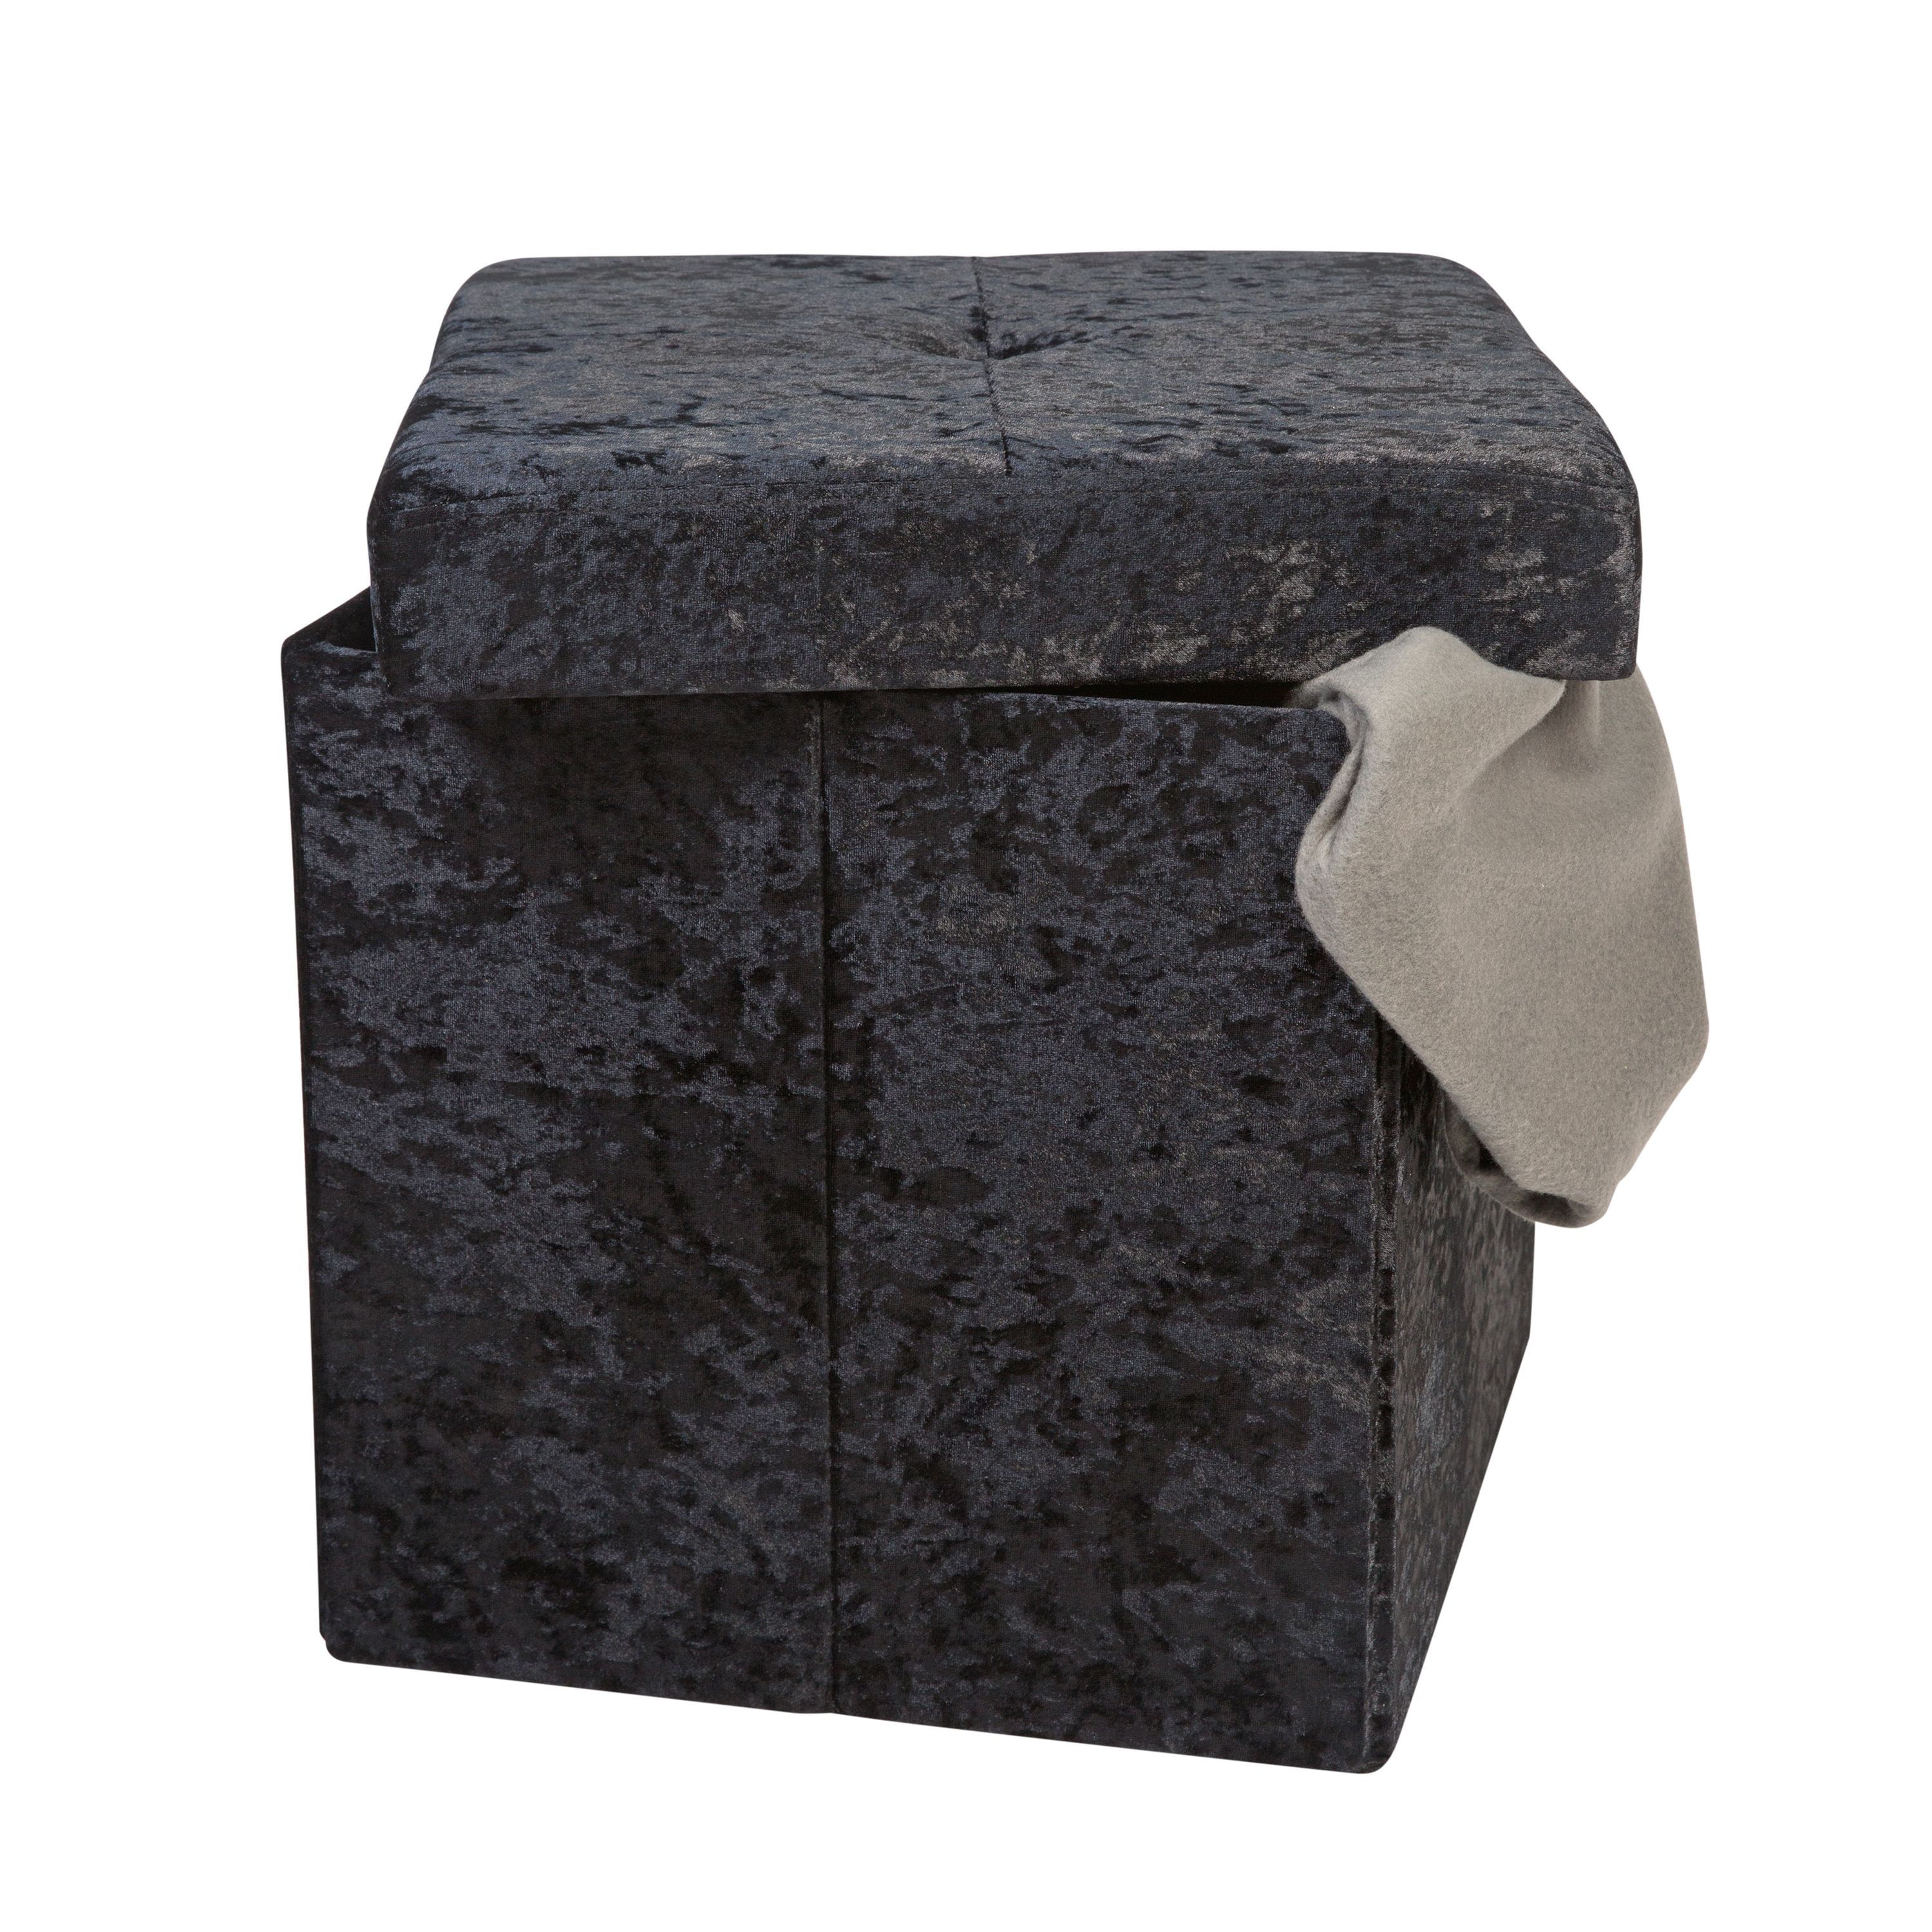 Spring Well,Beautiful Cube boxes in Crushed Velvet Dia Fabric Chest Box//Storage Blanket Box Champagne, Length 16 x Depth 16 x Hieght 16 Ottoman